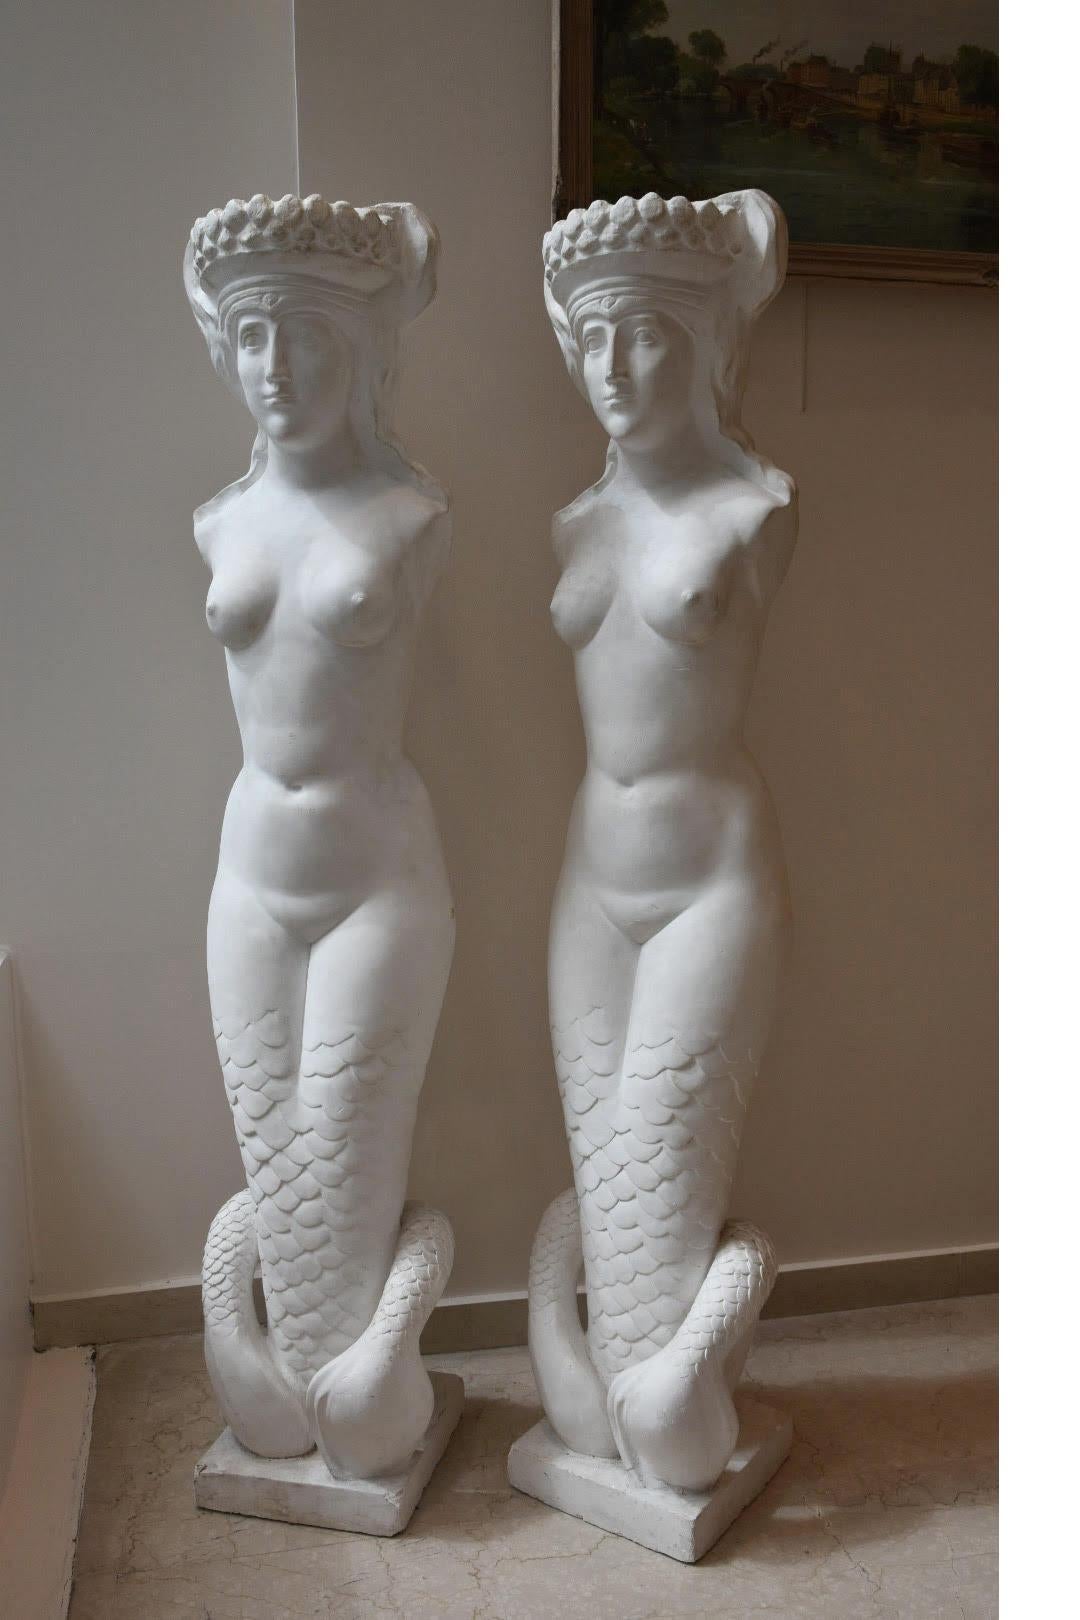 Exceptional pair of entrance flares, according to Henri Parayre for André Arbus.
Armed plaster torch decorated with a mermaid on a rectangular base in the spirit of the status of the Knossos Palace. Possibility of integrating flares in the